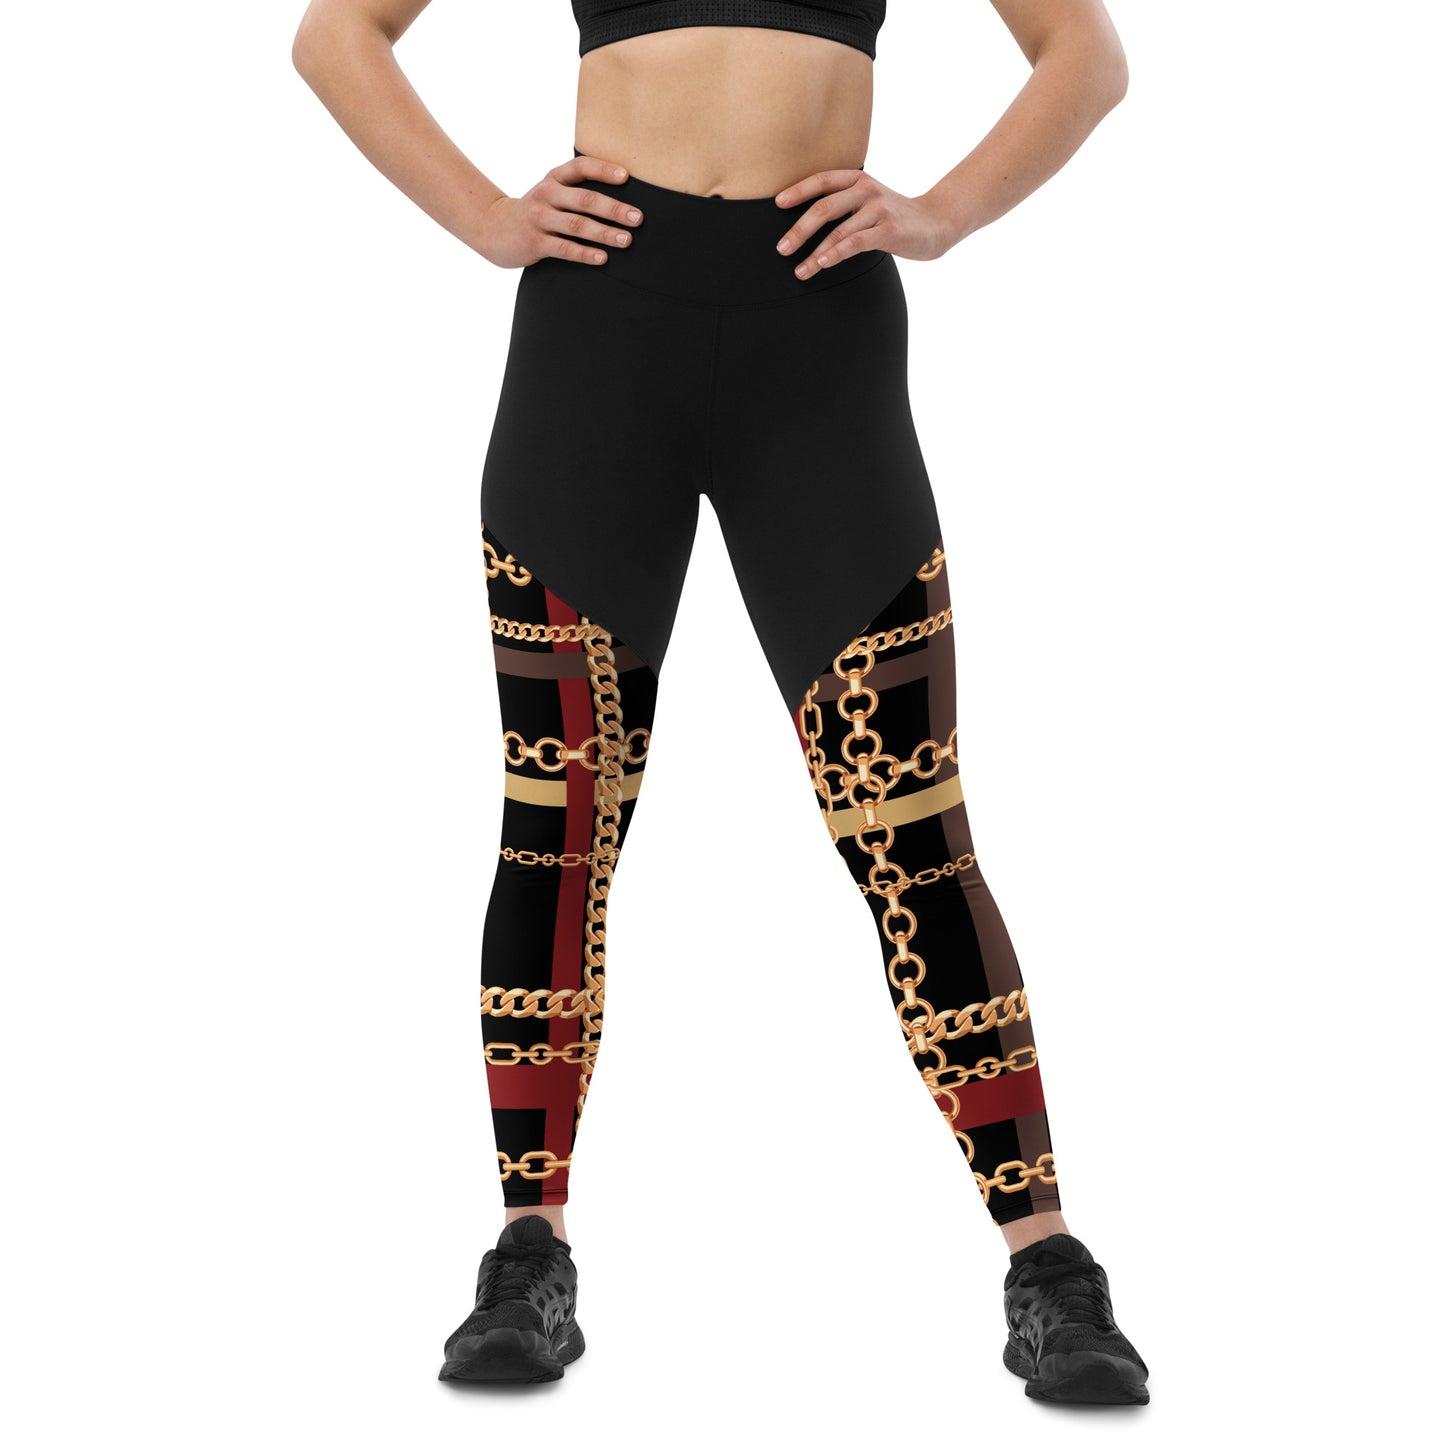 BJJ Couture Workout Red and Black Tartan Chain Leggings